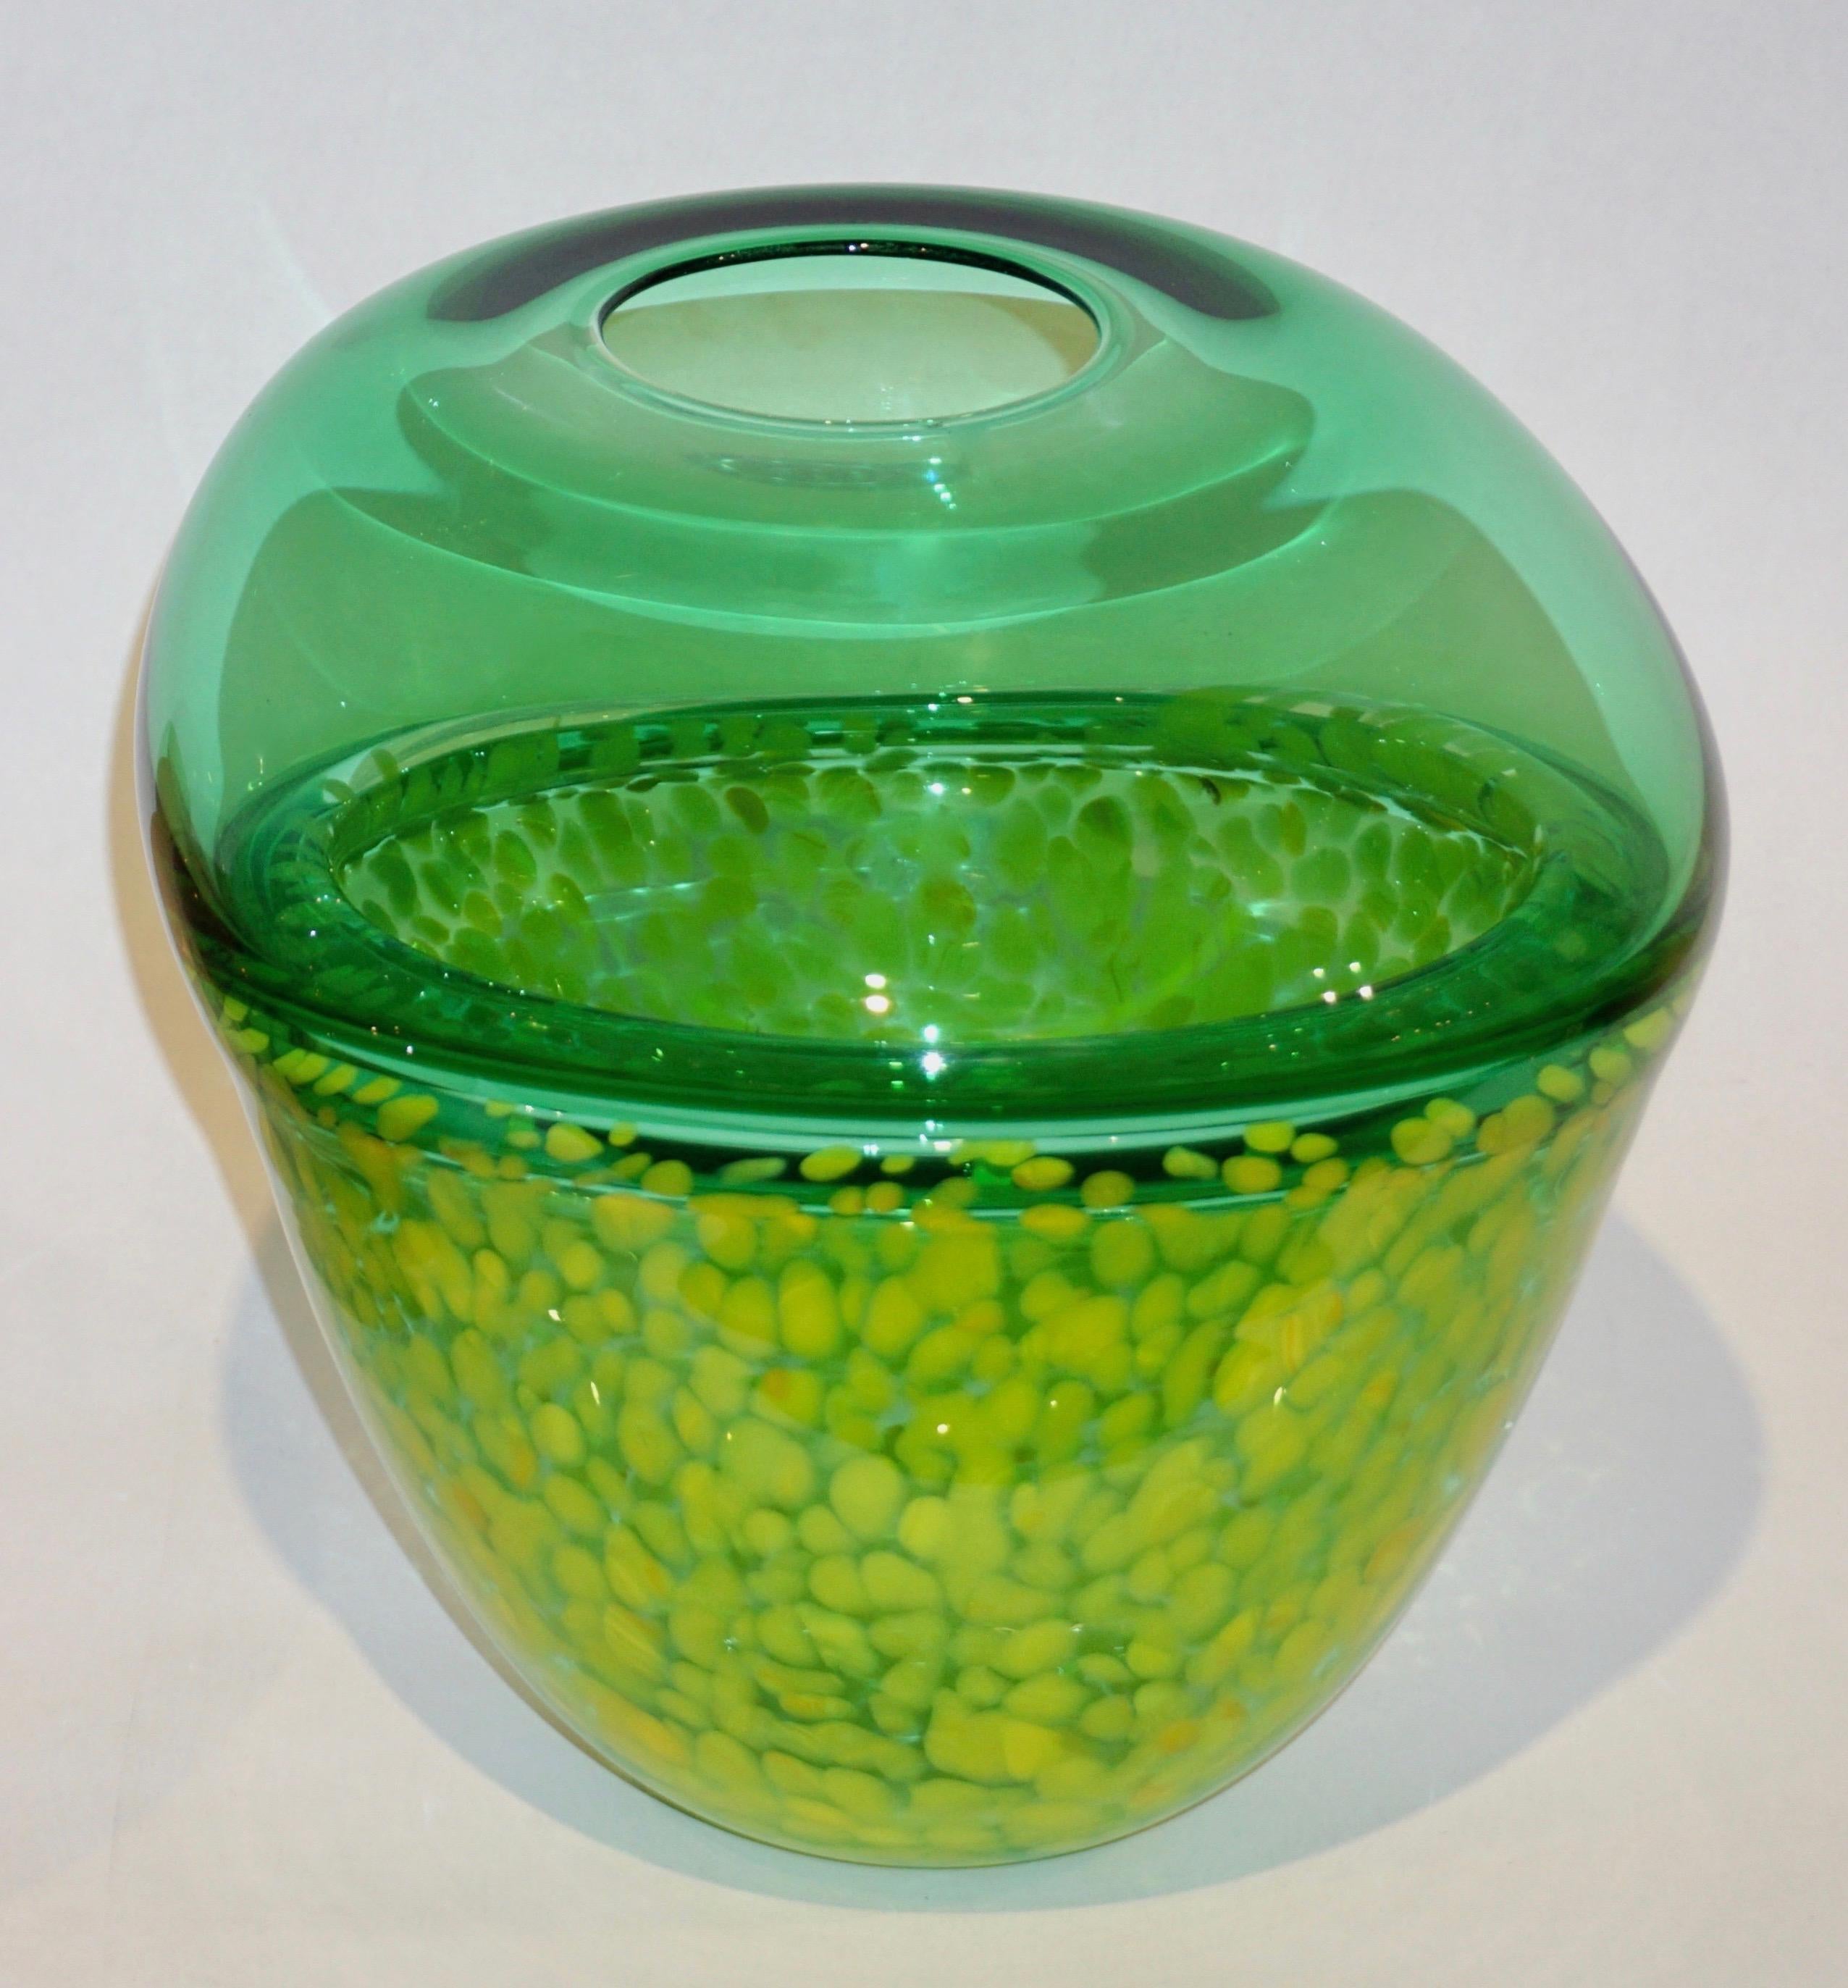 Hilton McConnico by Formia 1990s Italian Green Spotted Murano Art Glass Vase 8